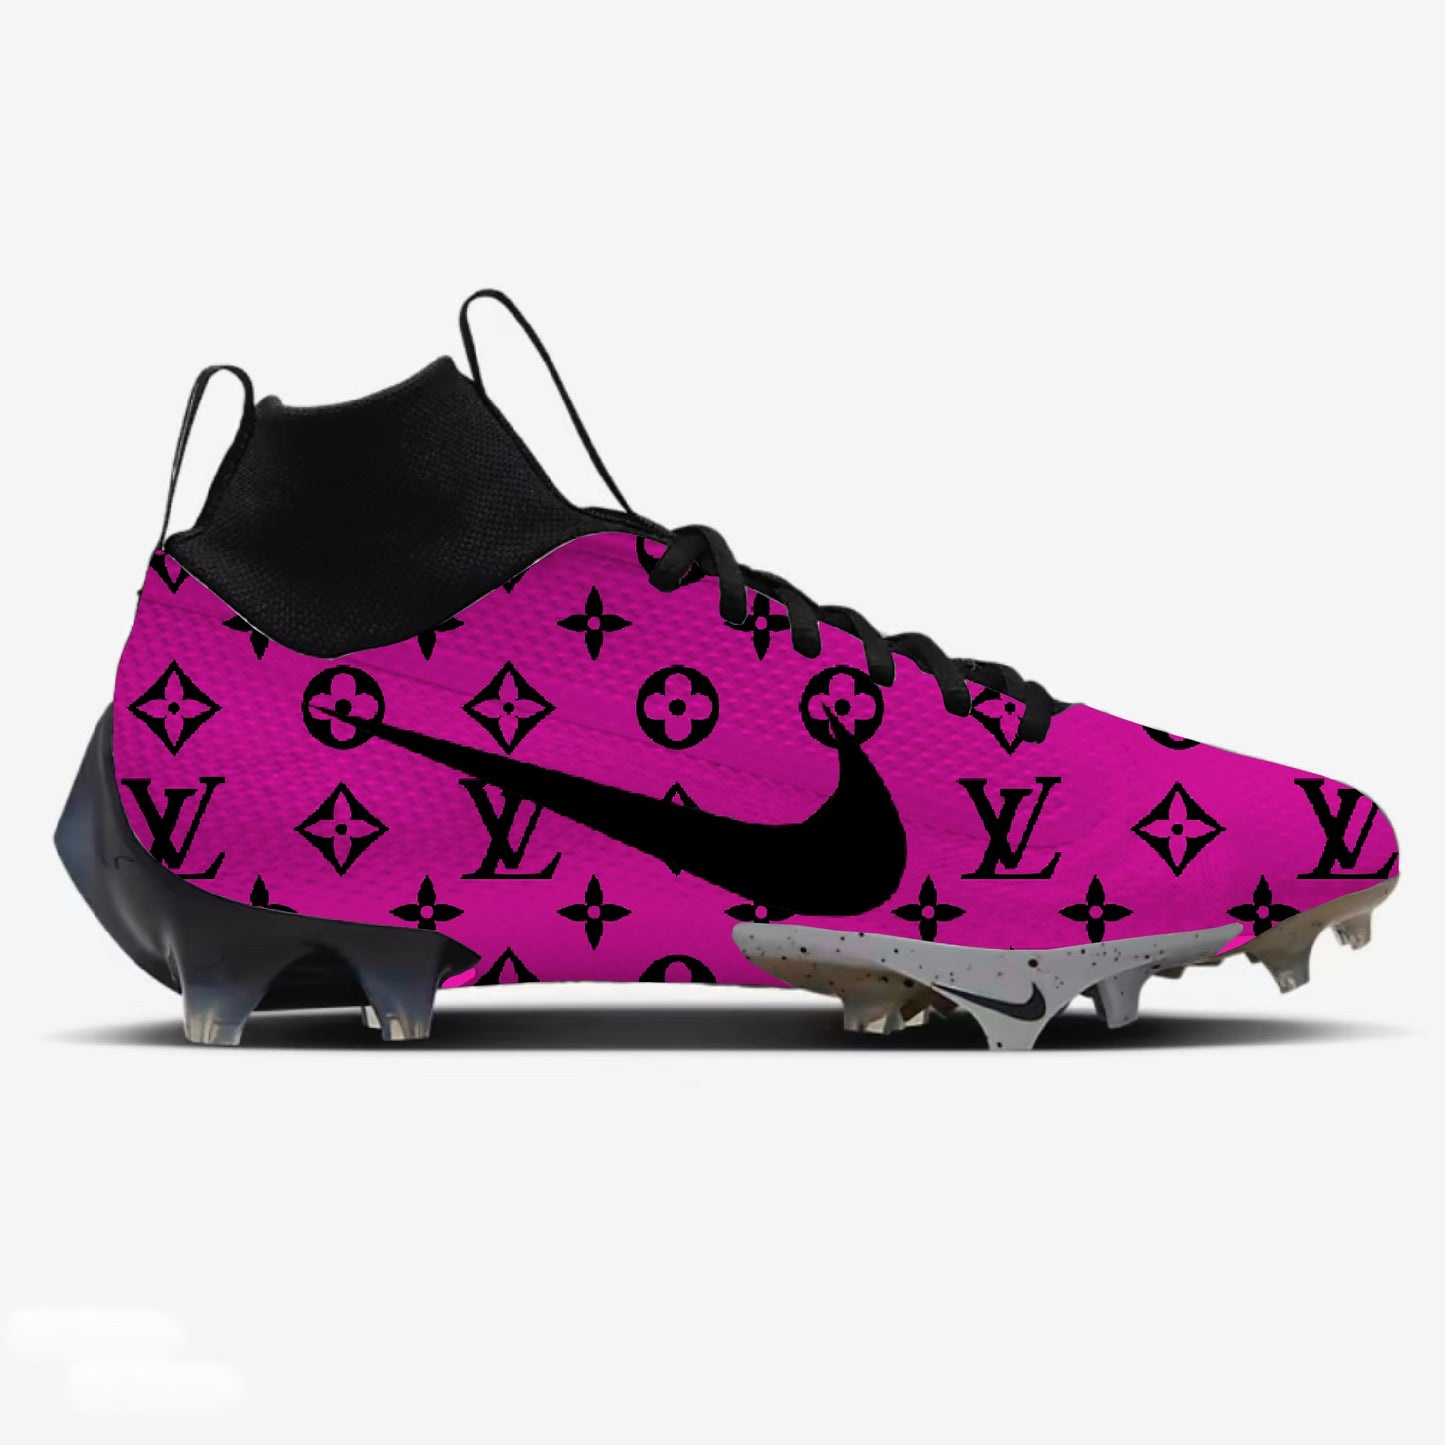 Breast Cancer Awareness Nike Football Cleats